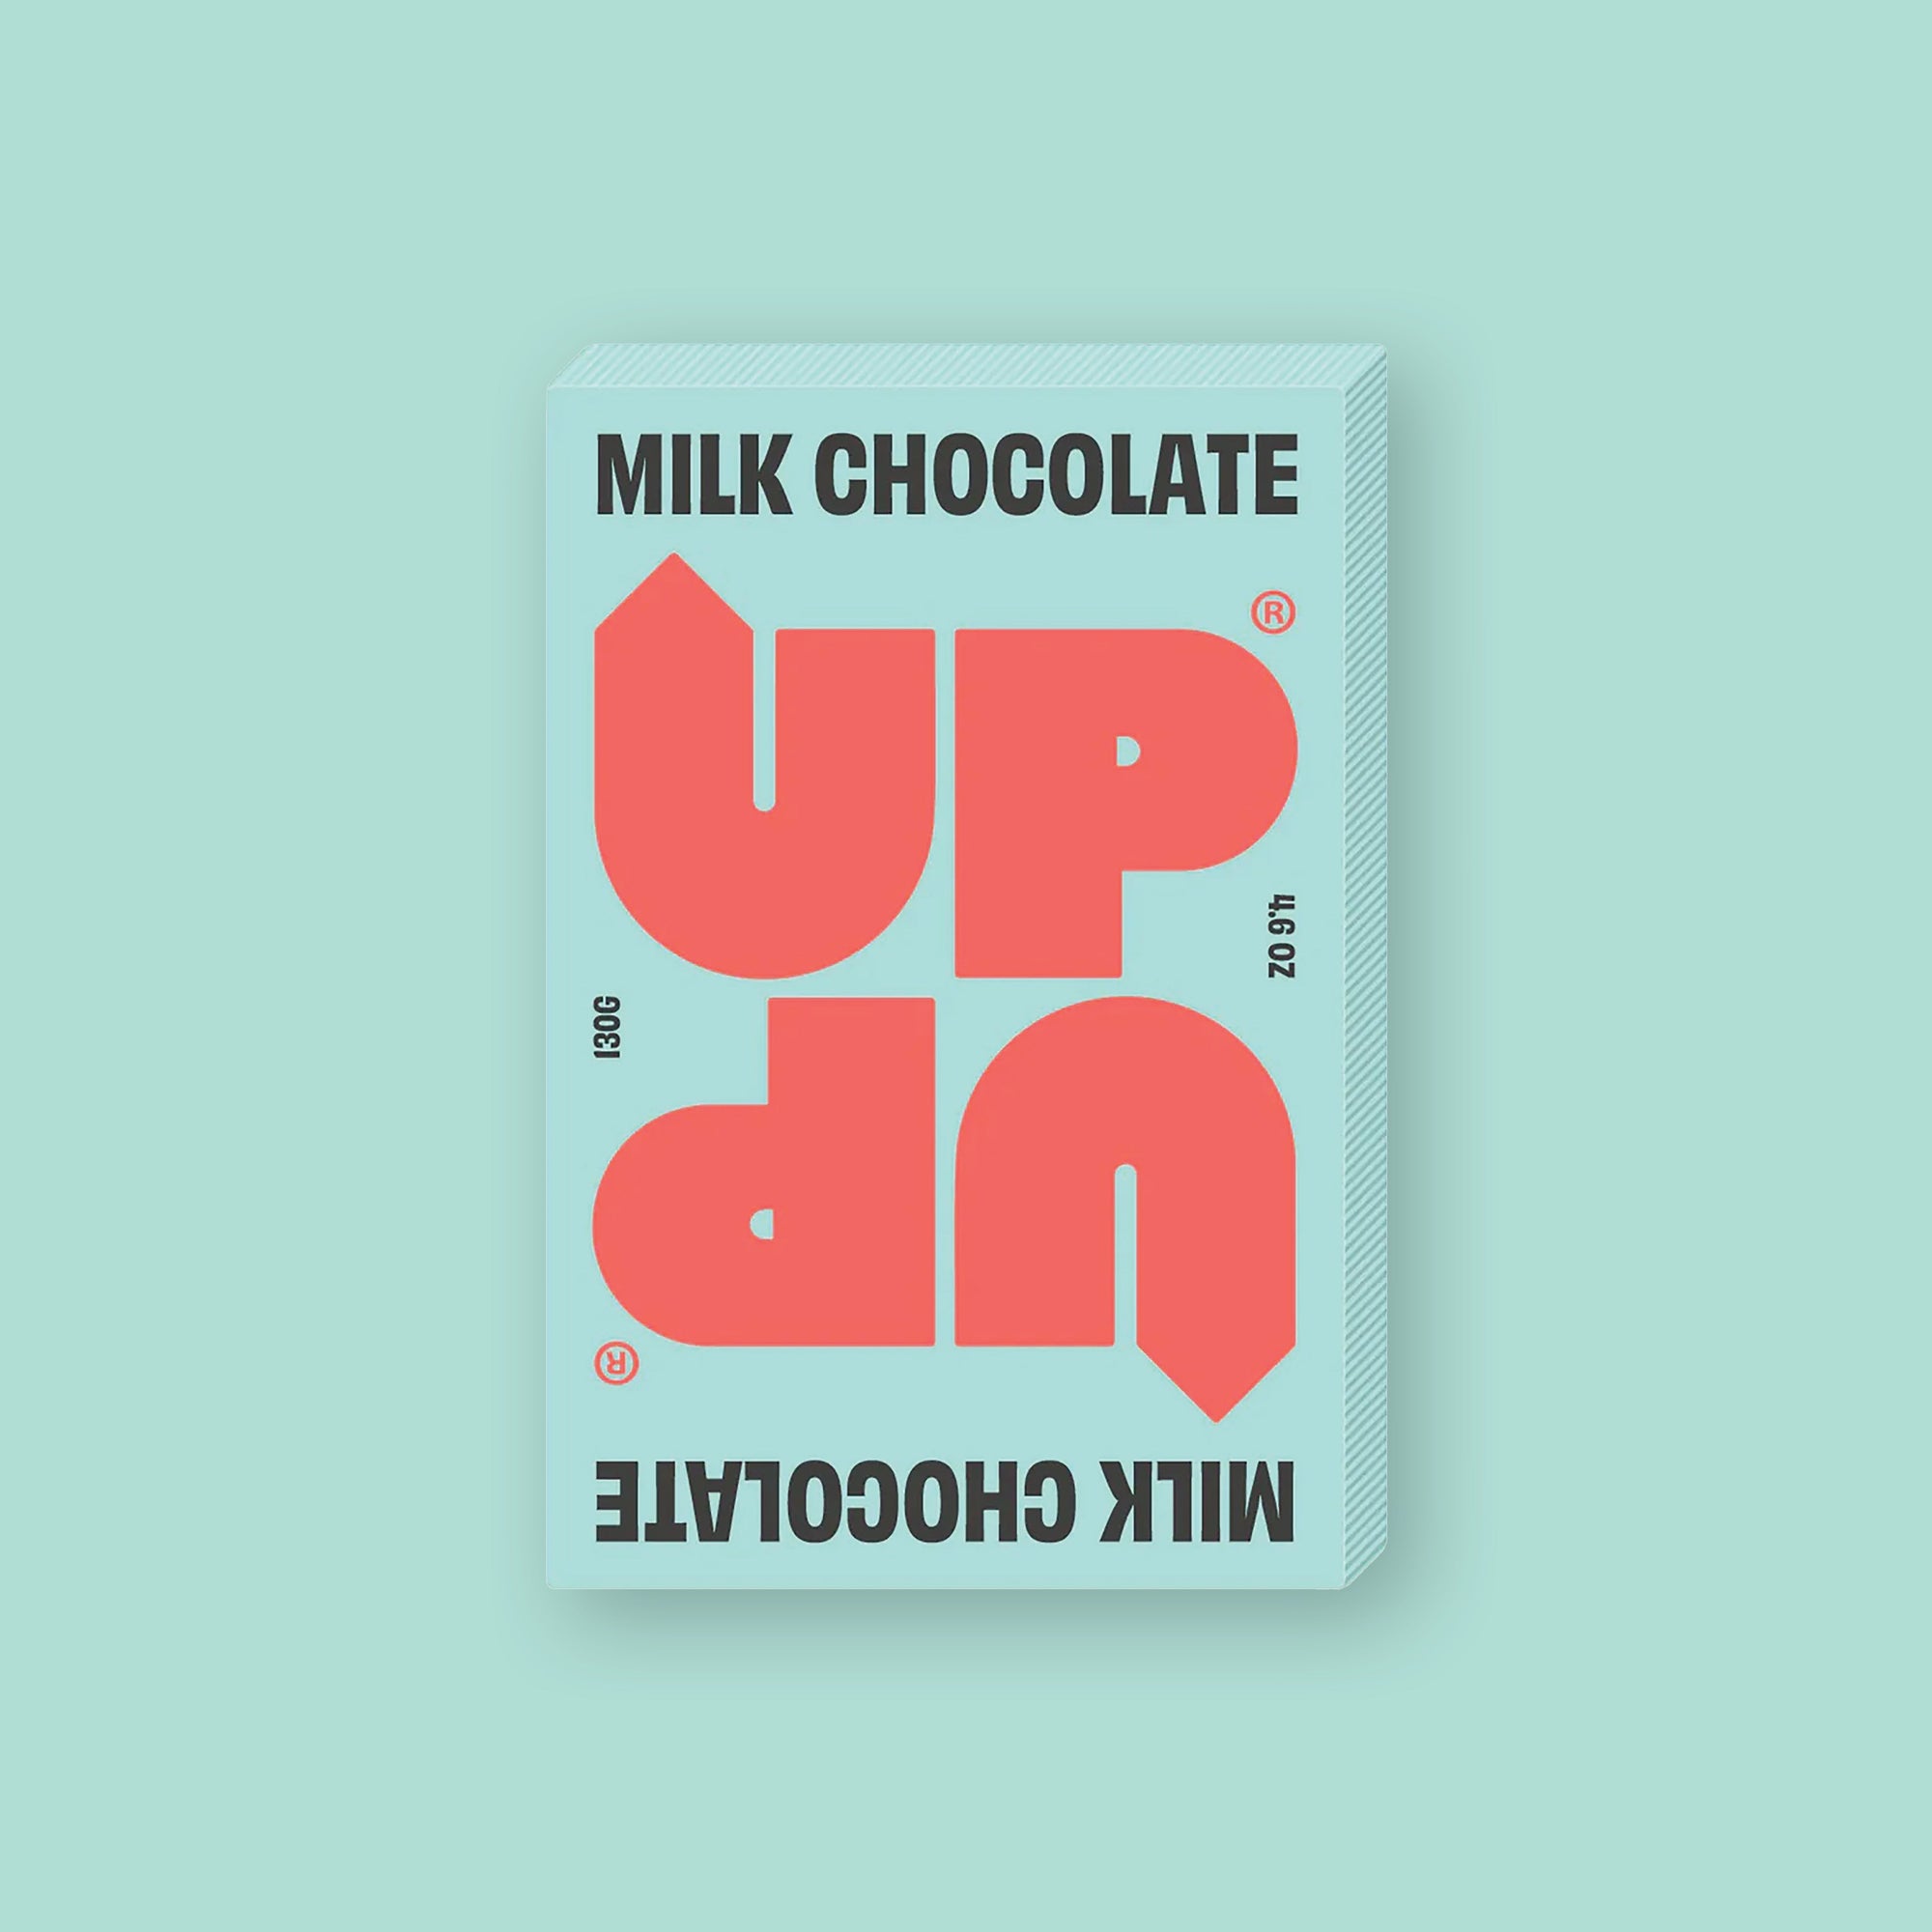 On a mint green background sits a box of UP UP Milk Chocolate. The packaging is in mint green and orangey-red.